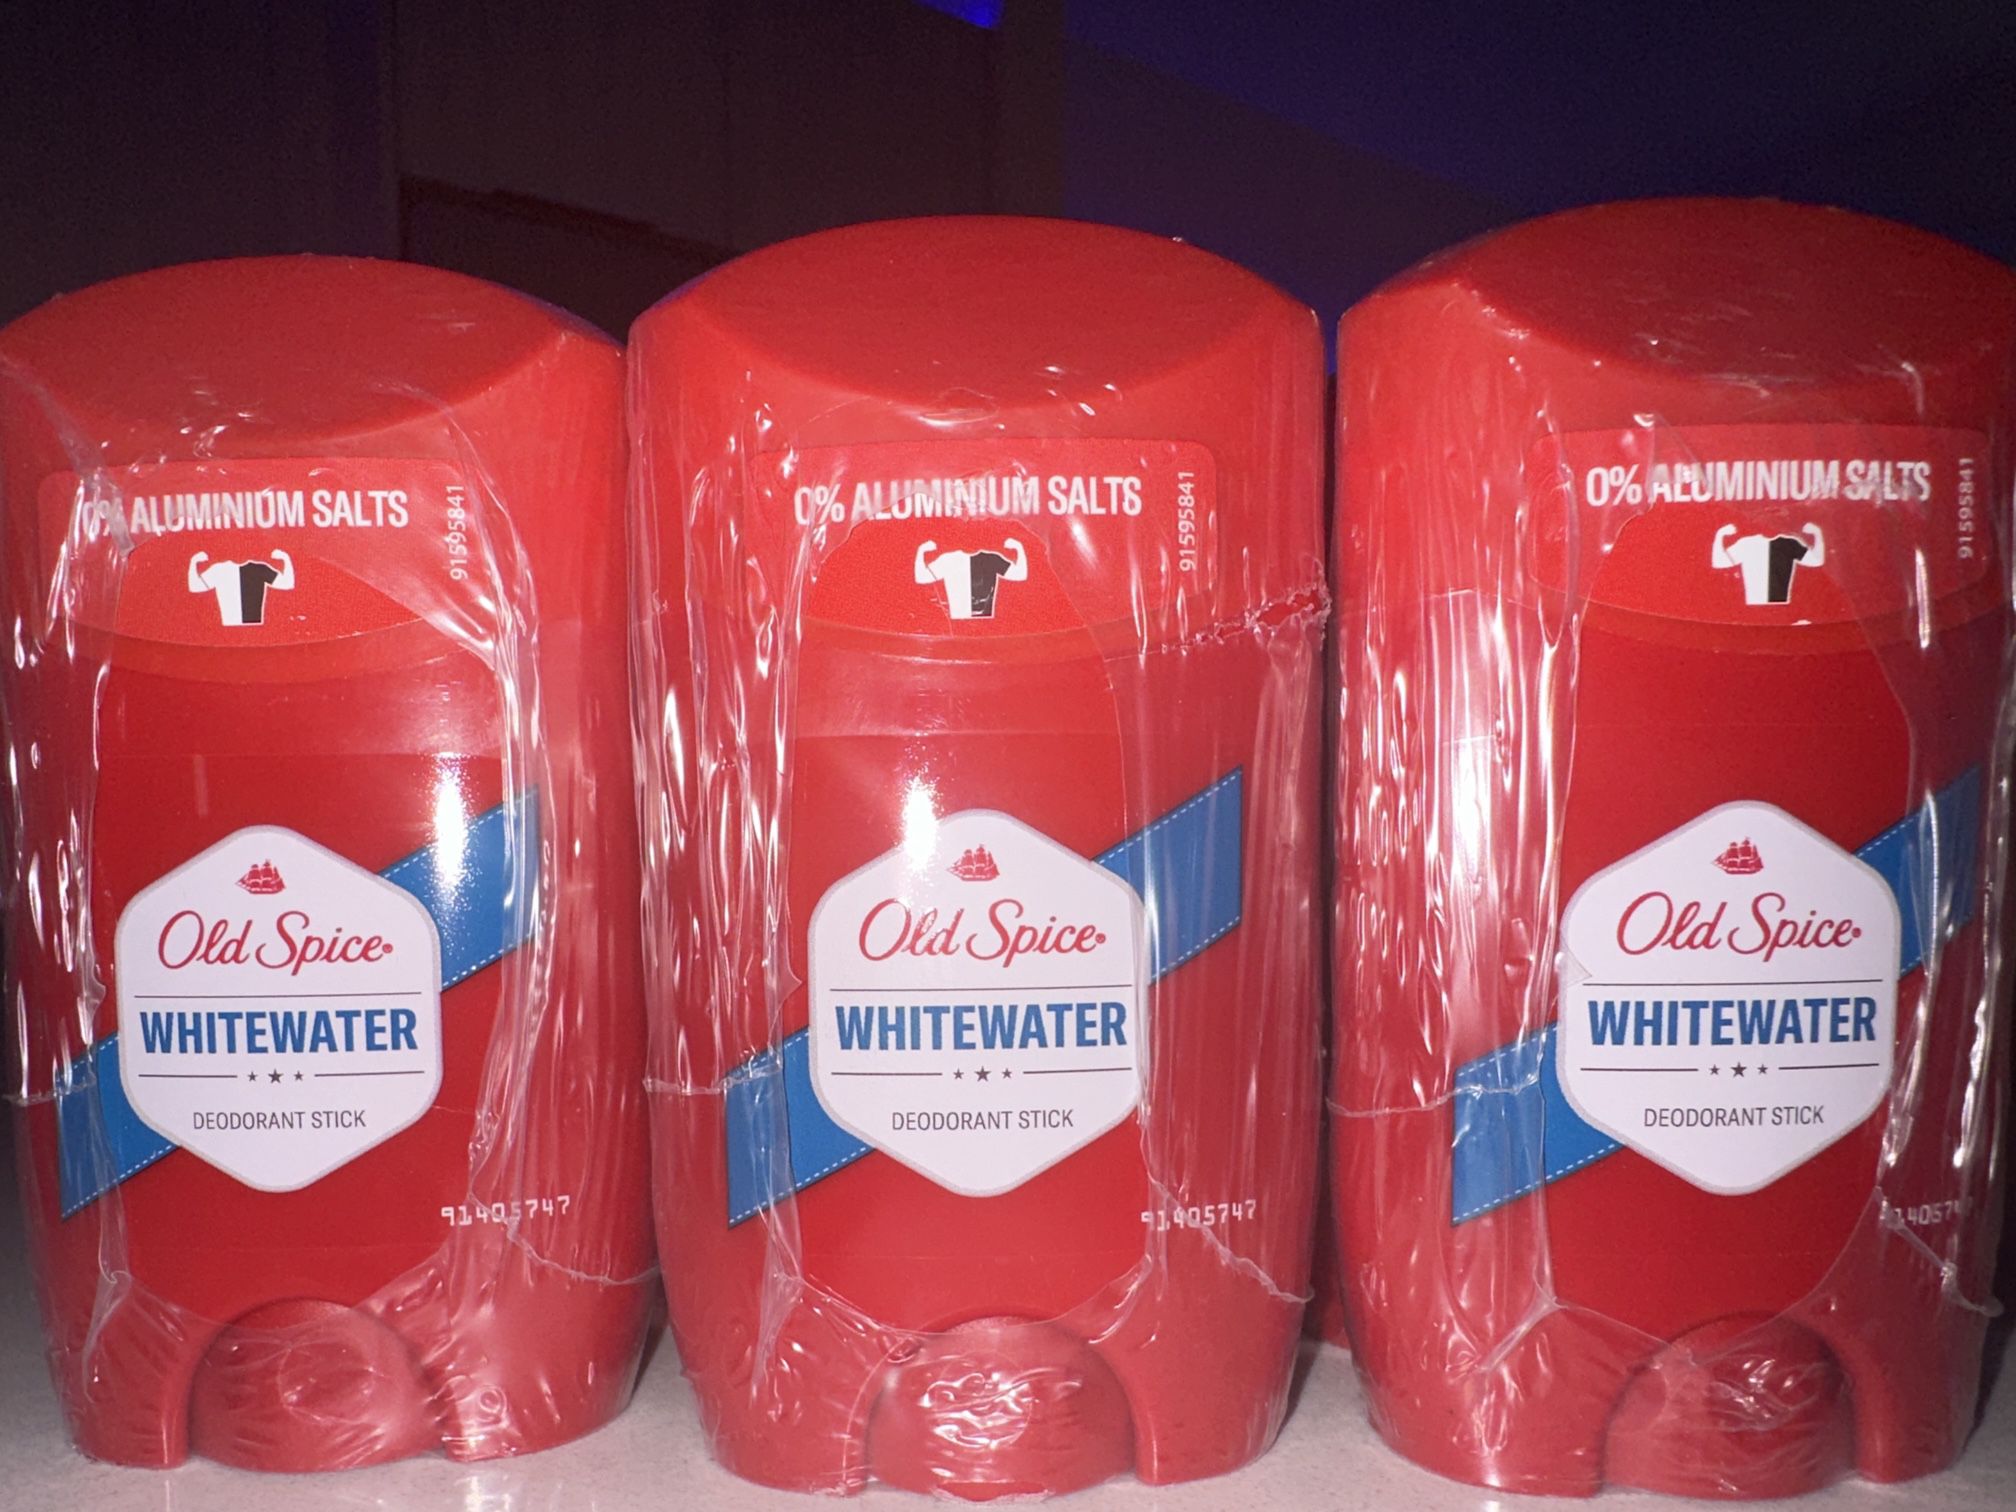 Old Spice White Water Deodorant 